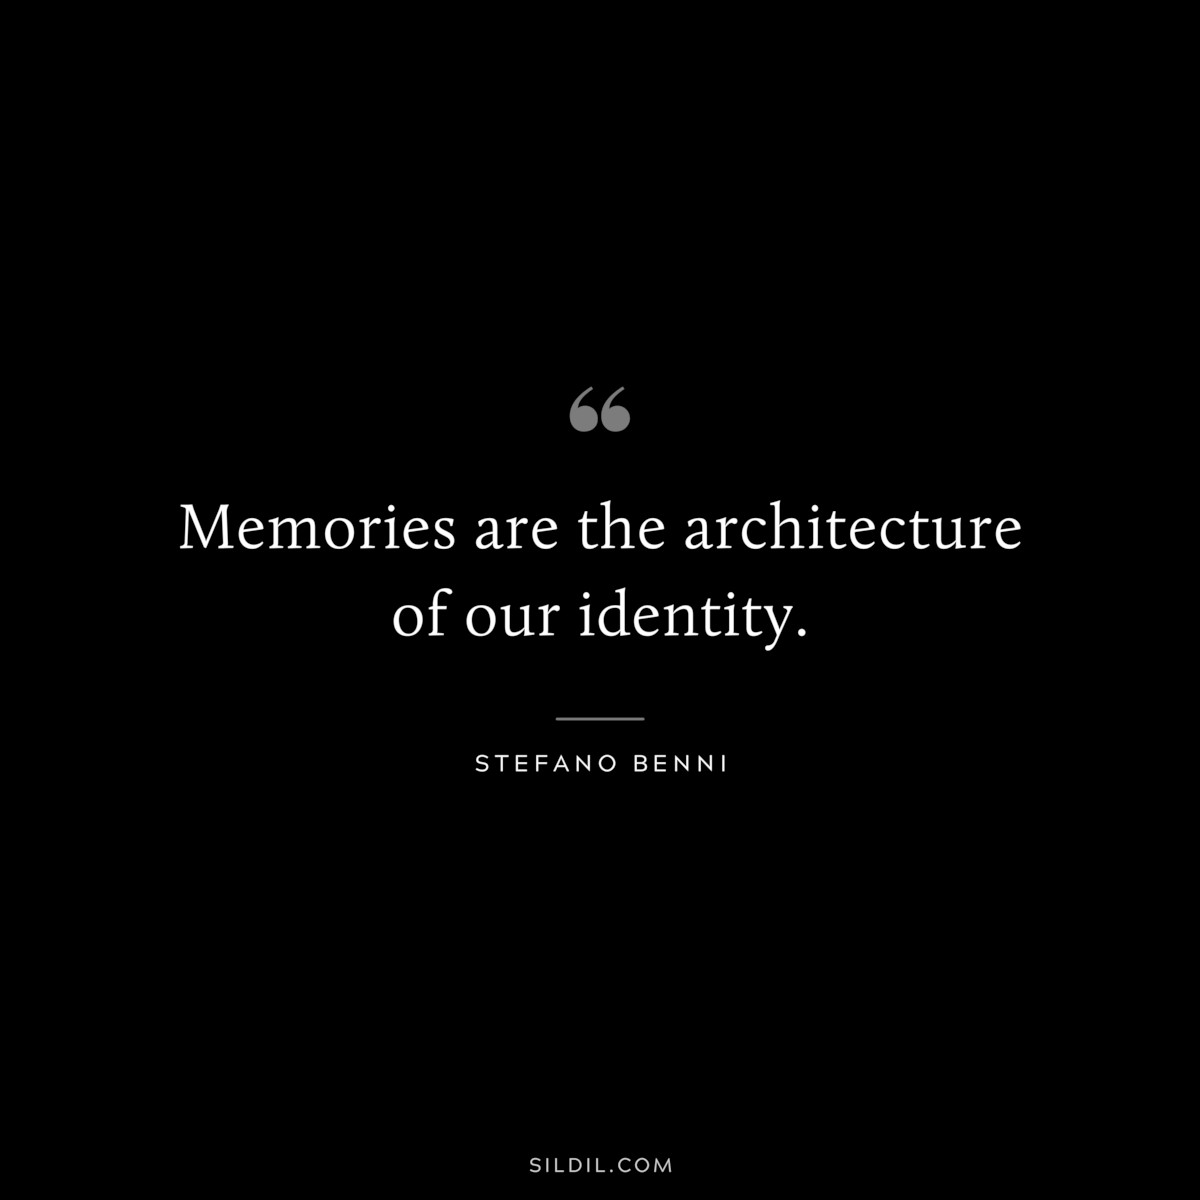 Memories are the architecture of our identity. ― Stefano Benni